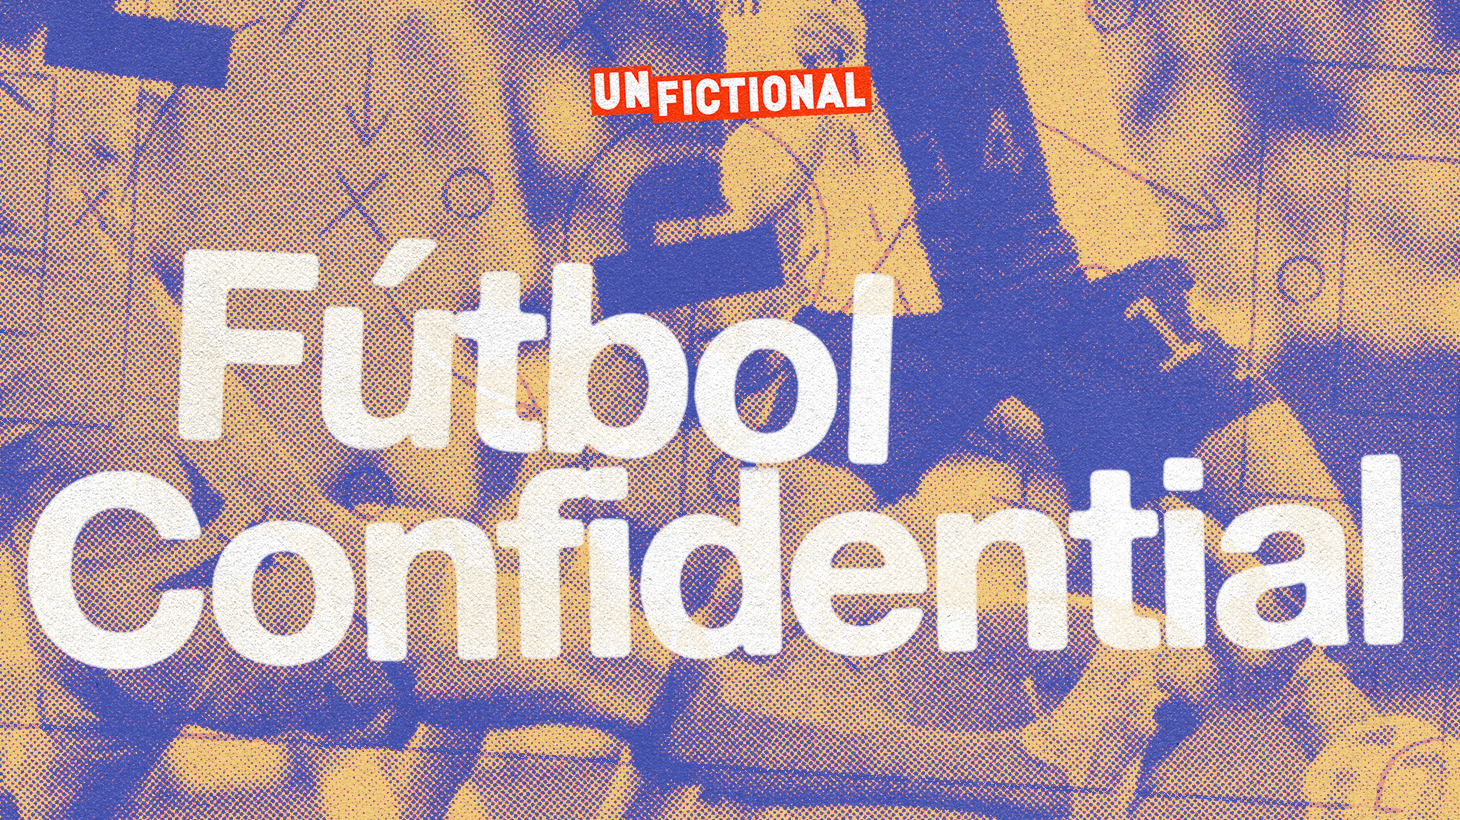 Fútbol Confidential looks at the legendary LA city league soccer team formed over beers in a Santa Monica pub by British expatriates.